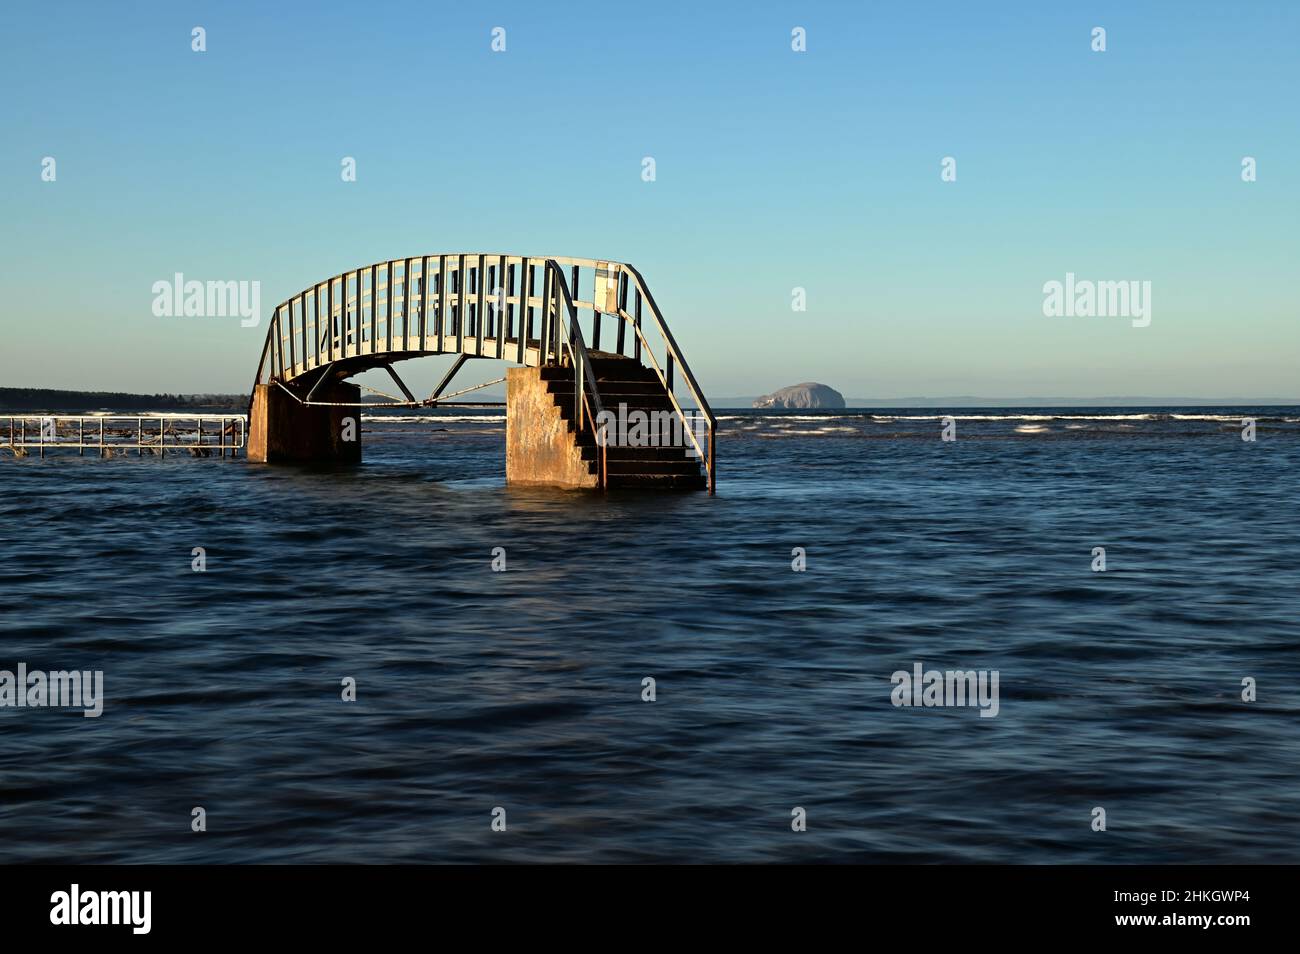 A view of the “bridge to nowhere” in Belhaven bay near Dunbar in East Lothian, Scotland. Stock Photo